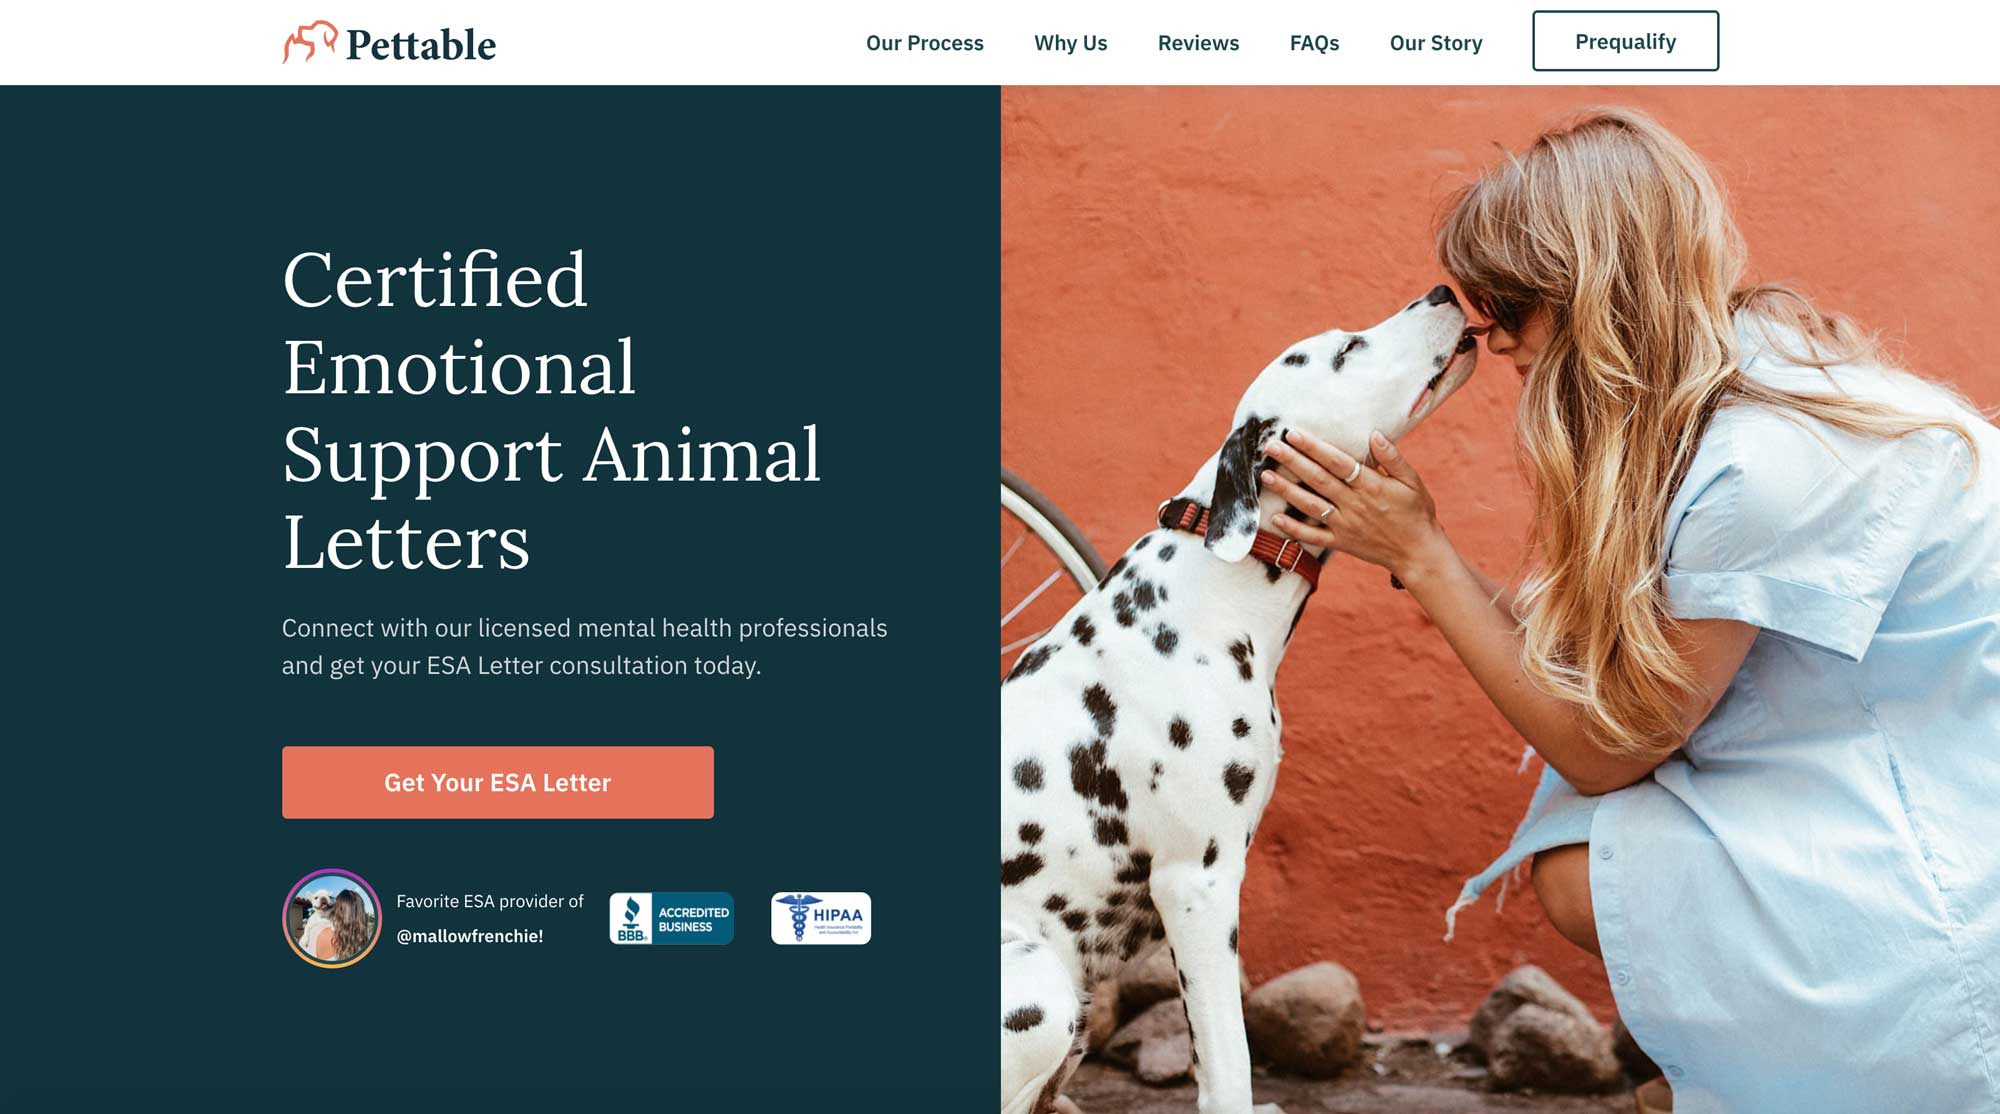 Emotional Support Animal Letter Services - The Top Companies Reviewed